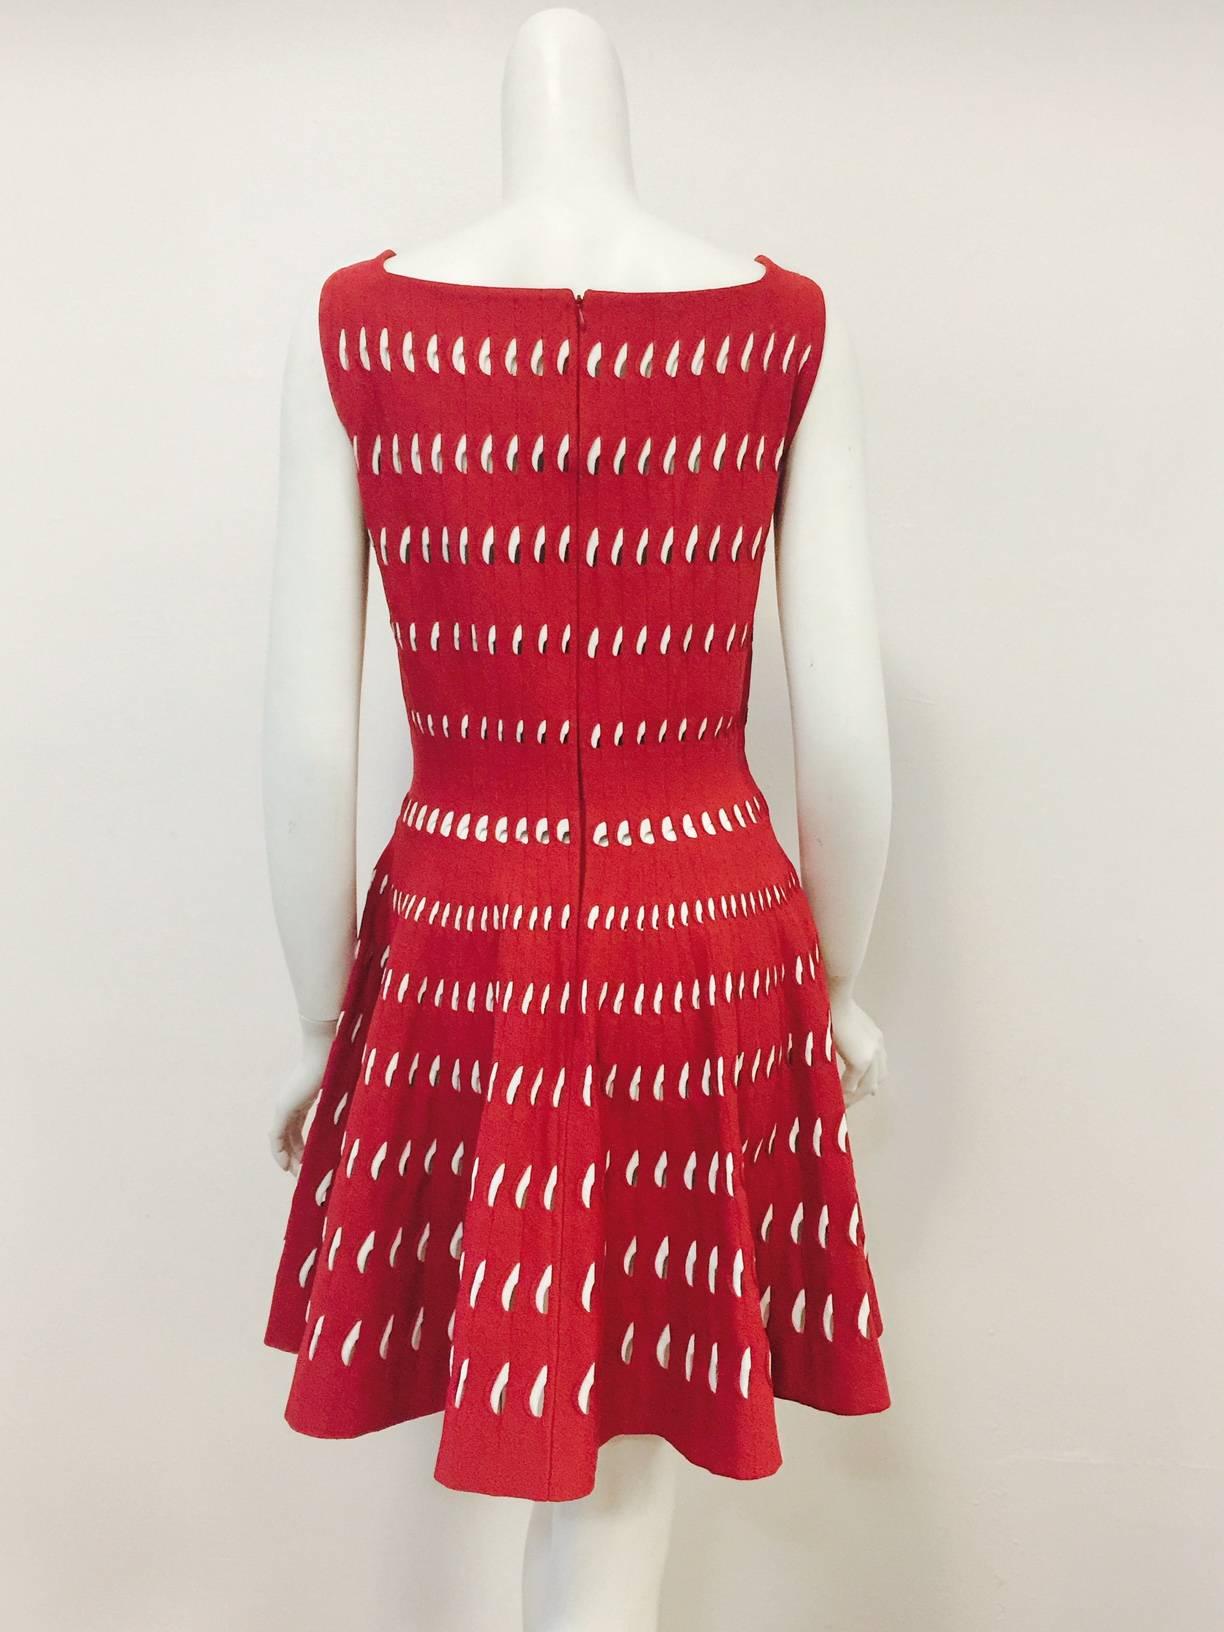 Azzedine Alaia Red & White Stretch Sleeveless Dress W Architectural Cutouts In Excellent Condition For Sale In Palm Beach, FL